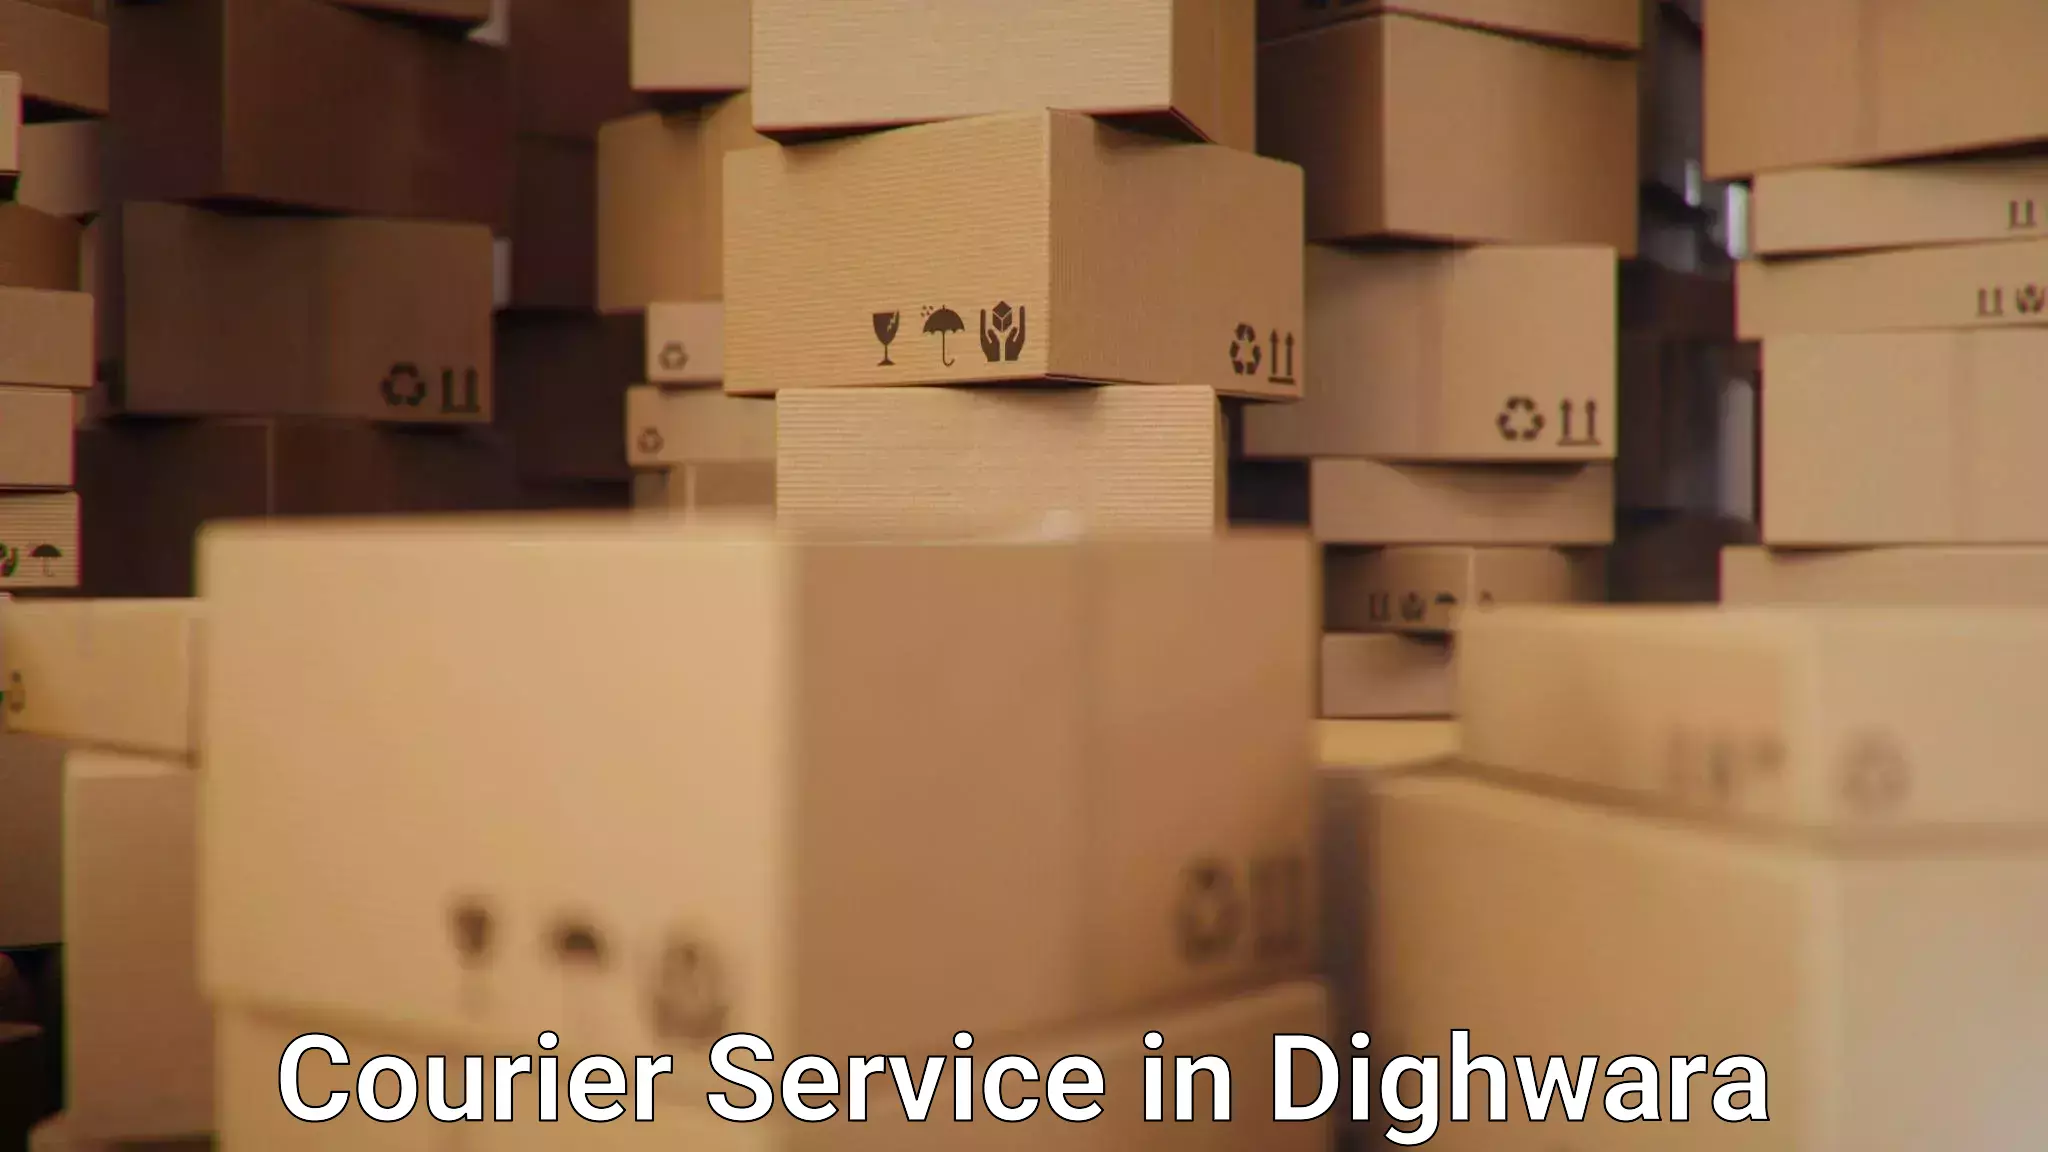 Enhanced delivery experience in Dighwara